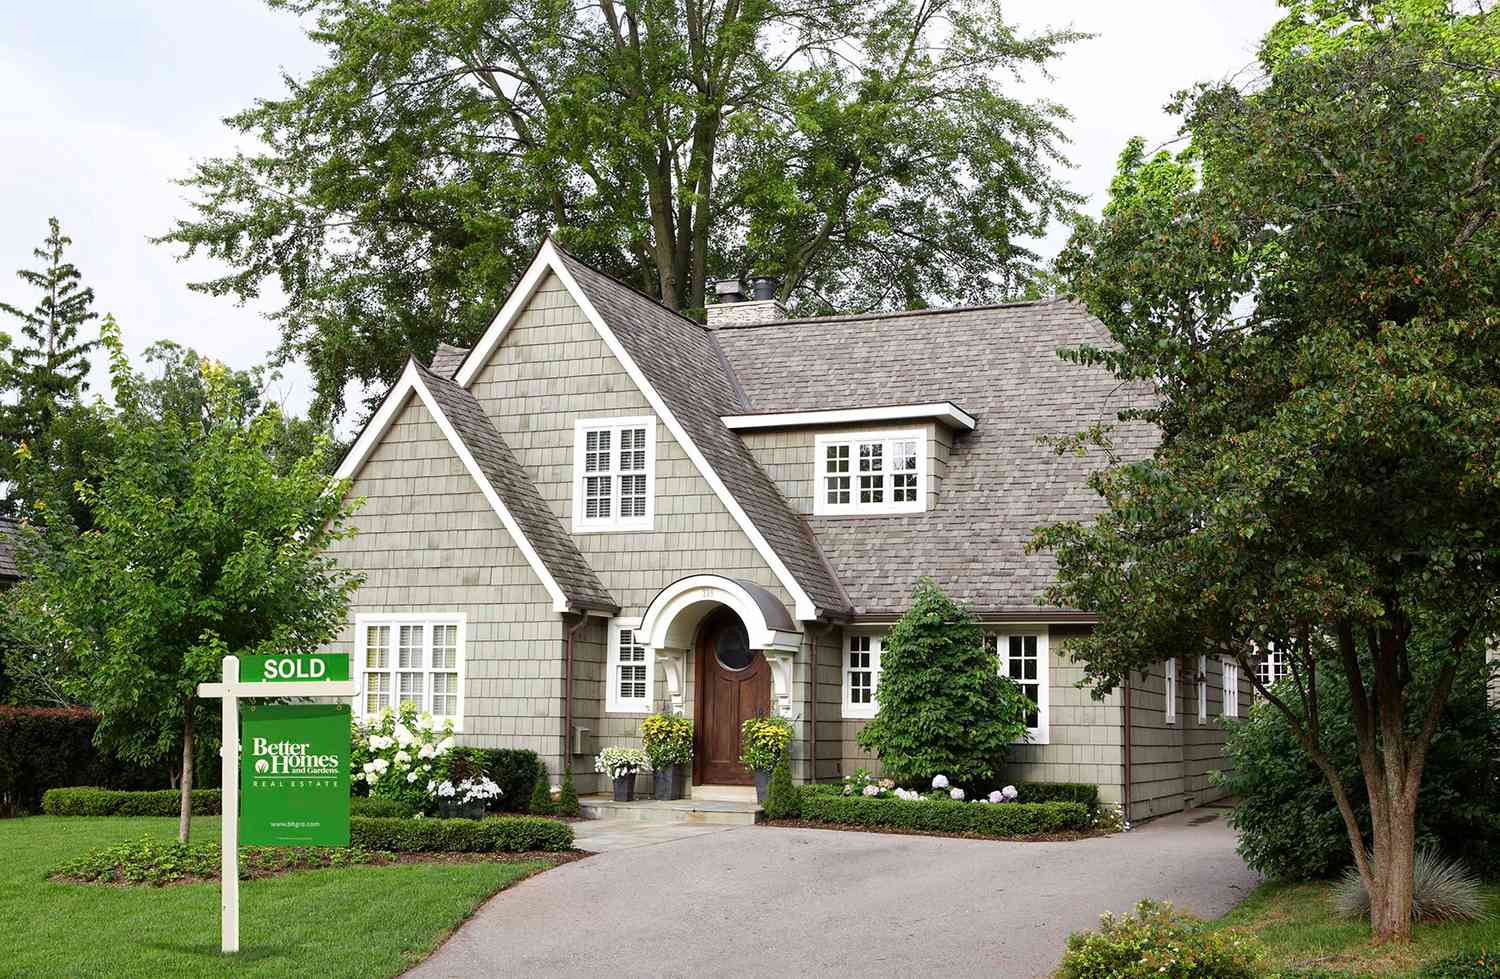 Tudor style home with sold sign in front yard BHGRE